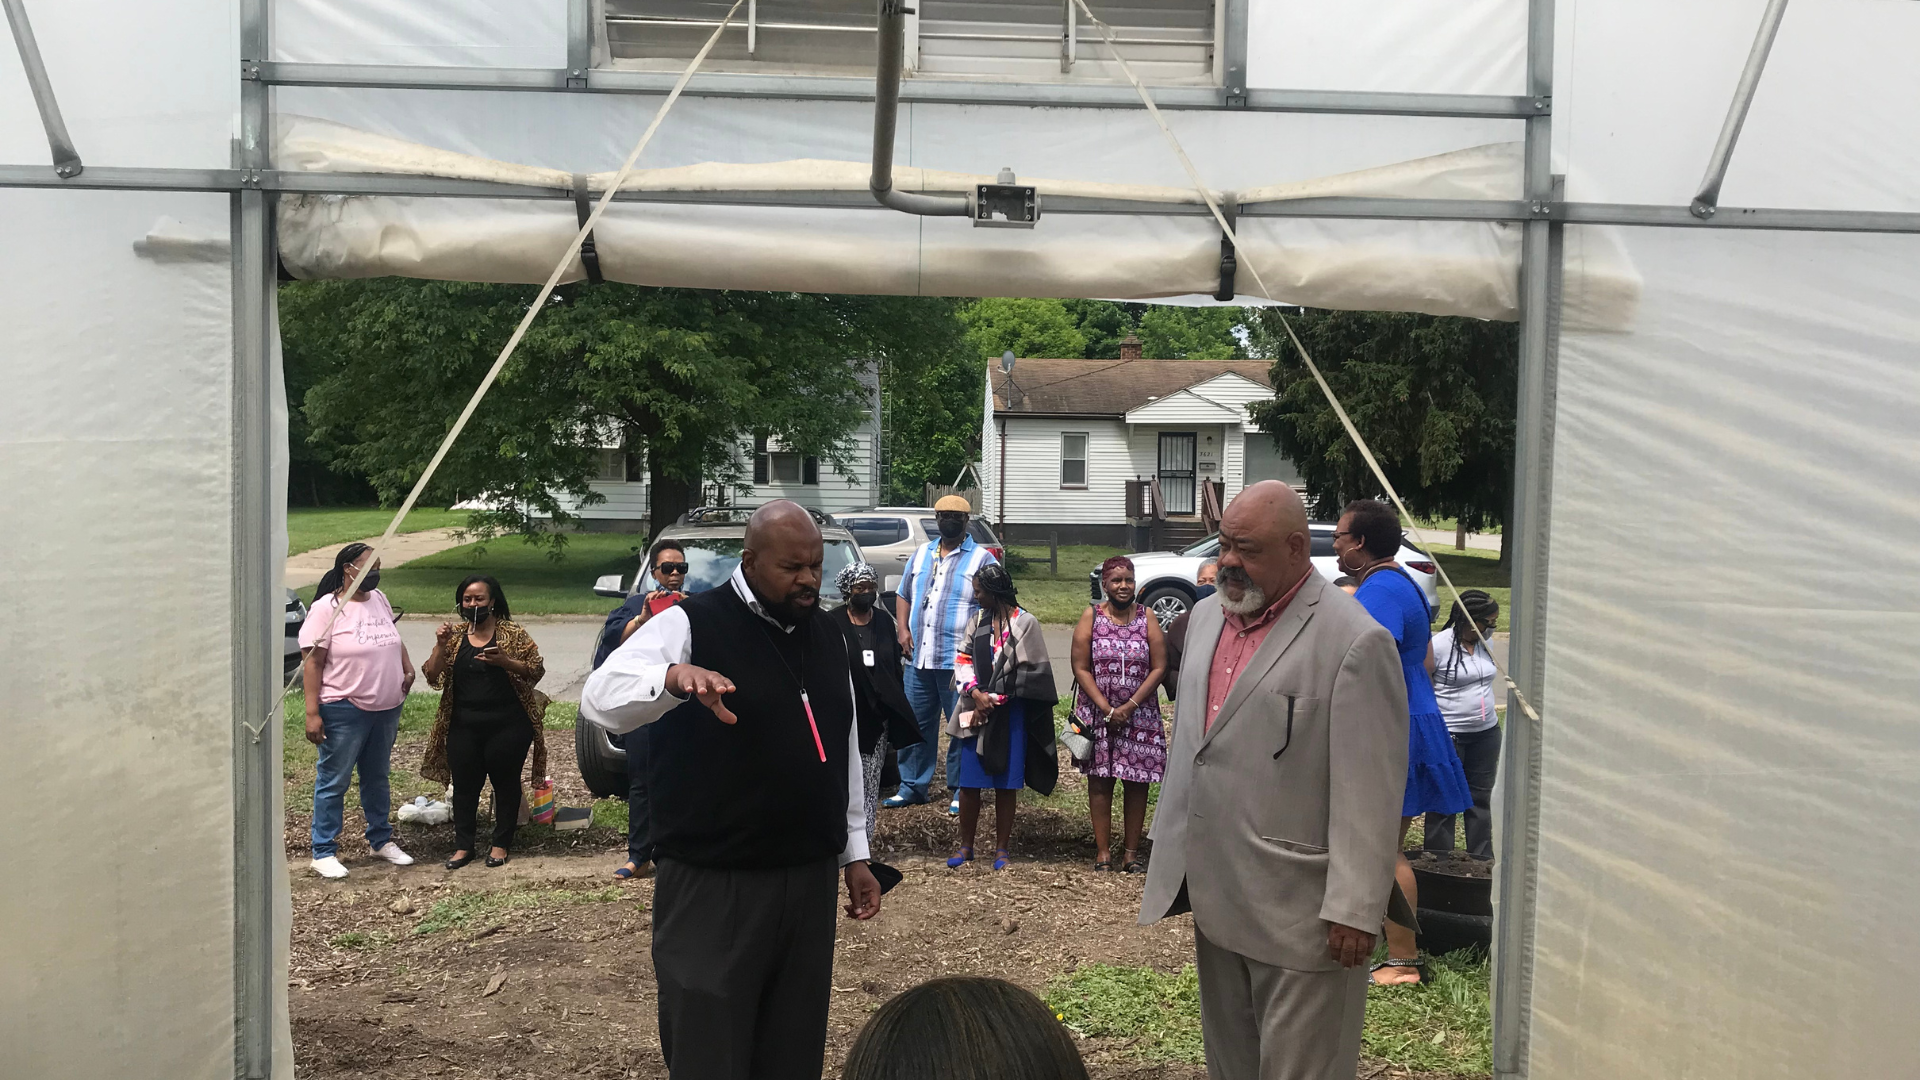 Pastor Overton stands blessing EJ's Garden for generations to come.